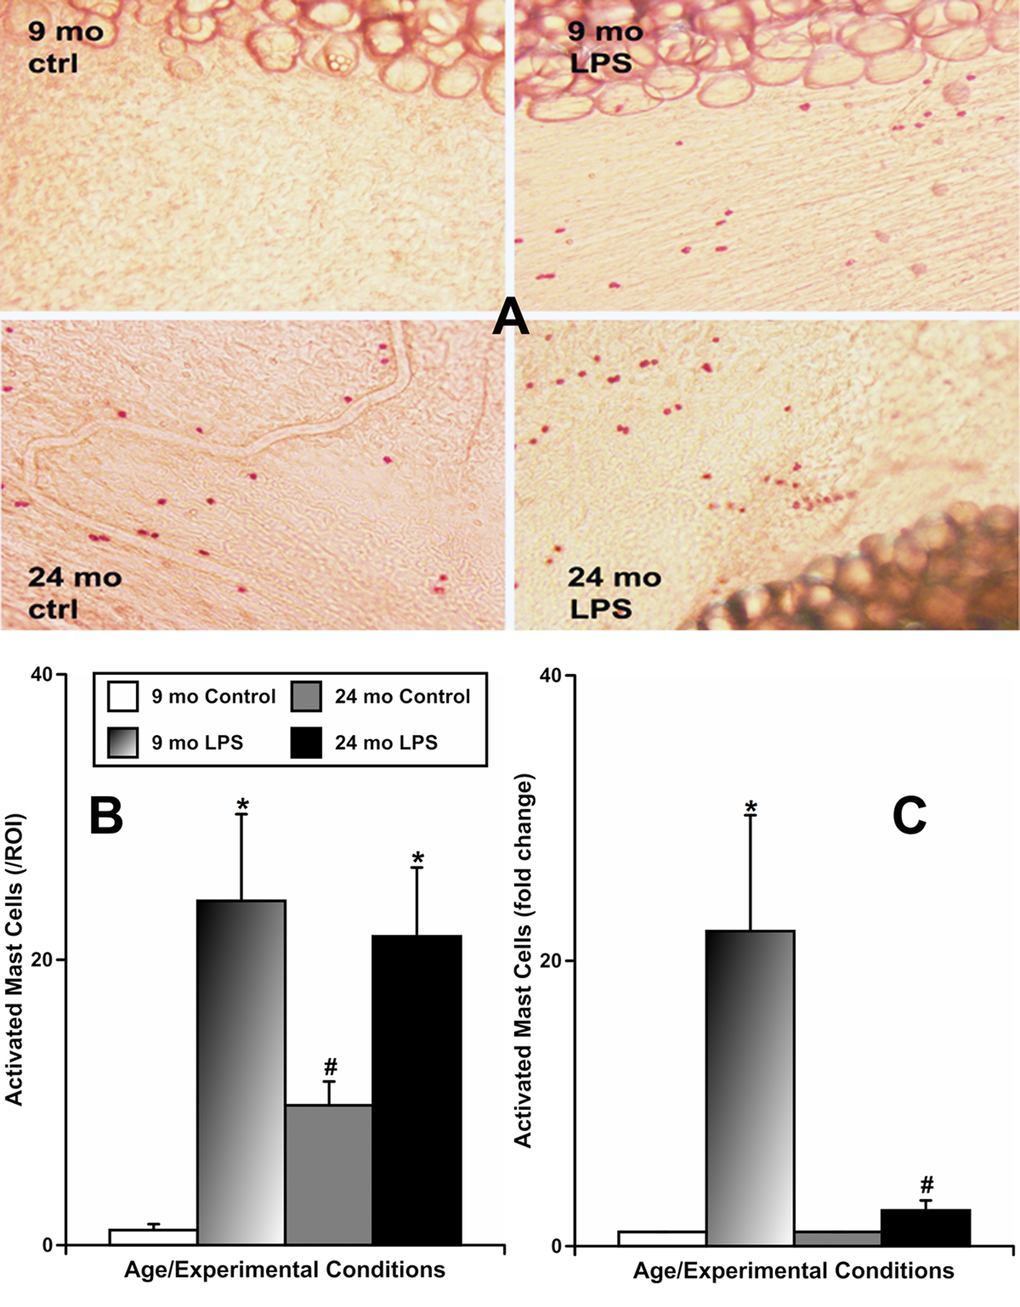 Effects of LPS-induced acute inflammation on activation of mast cells located in mesentery close to mesenteric lymphatic vessels in adult (9 mo, n=4 for control and n=4 for LPS-treated groups) and aged (24 mo, n=4 for control and n=4 for LPS-treated groups) rats. (A) representative images of activated mast cells stained by Ruthenium Red in sham (ctrl) and LPS-treated mesenteric segments of both ages; (B) comparison of number of activated mast cells per region of interest (ROI) under various conditions; (C) similar data normalized to control conditions for that age group to demonstrate the fold change in number of mast cells activated by LPS. * indicates significant differences (p 